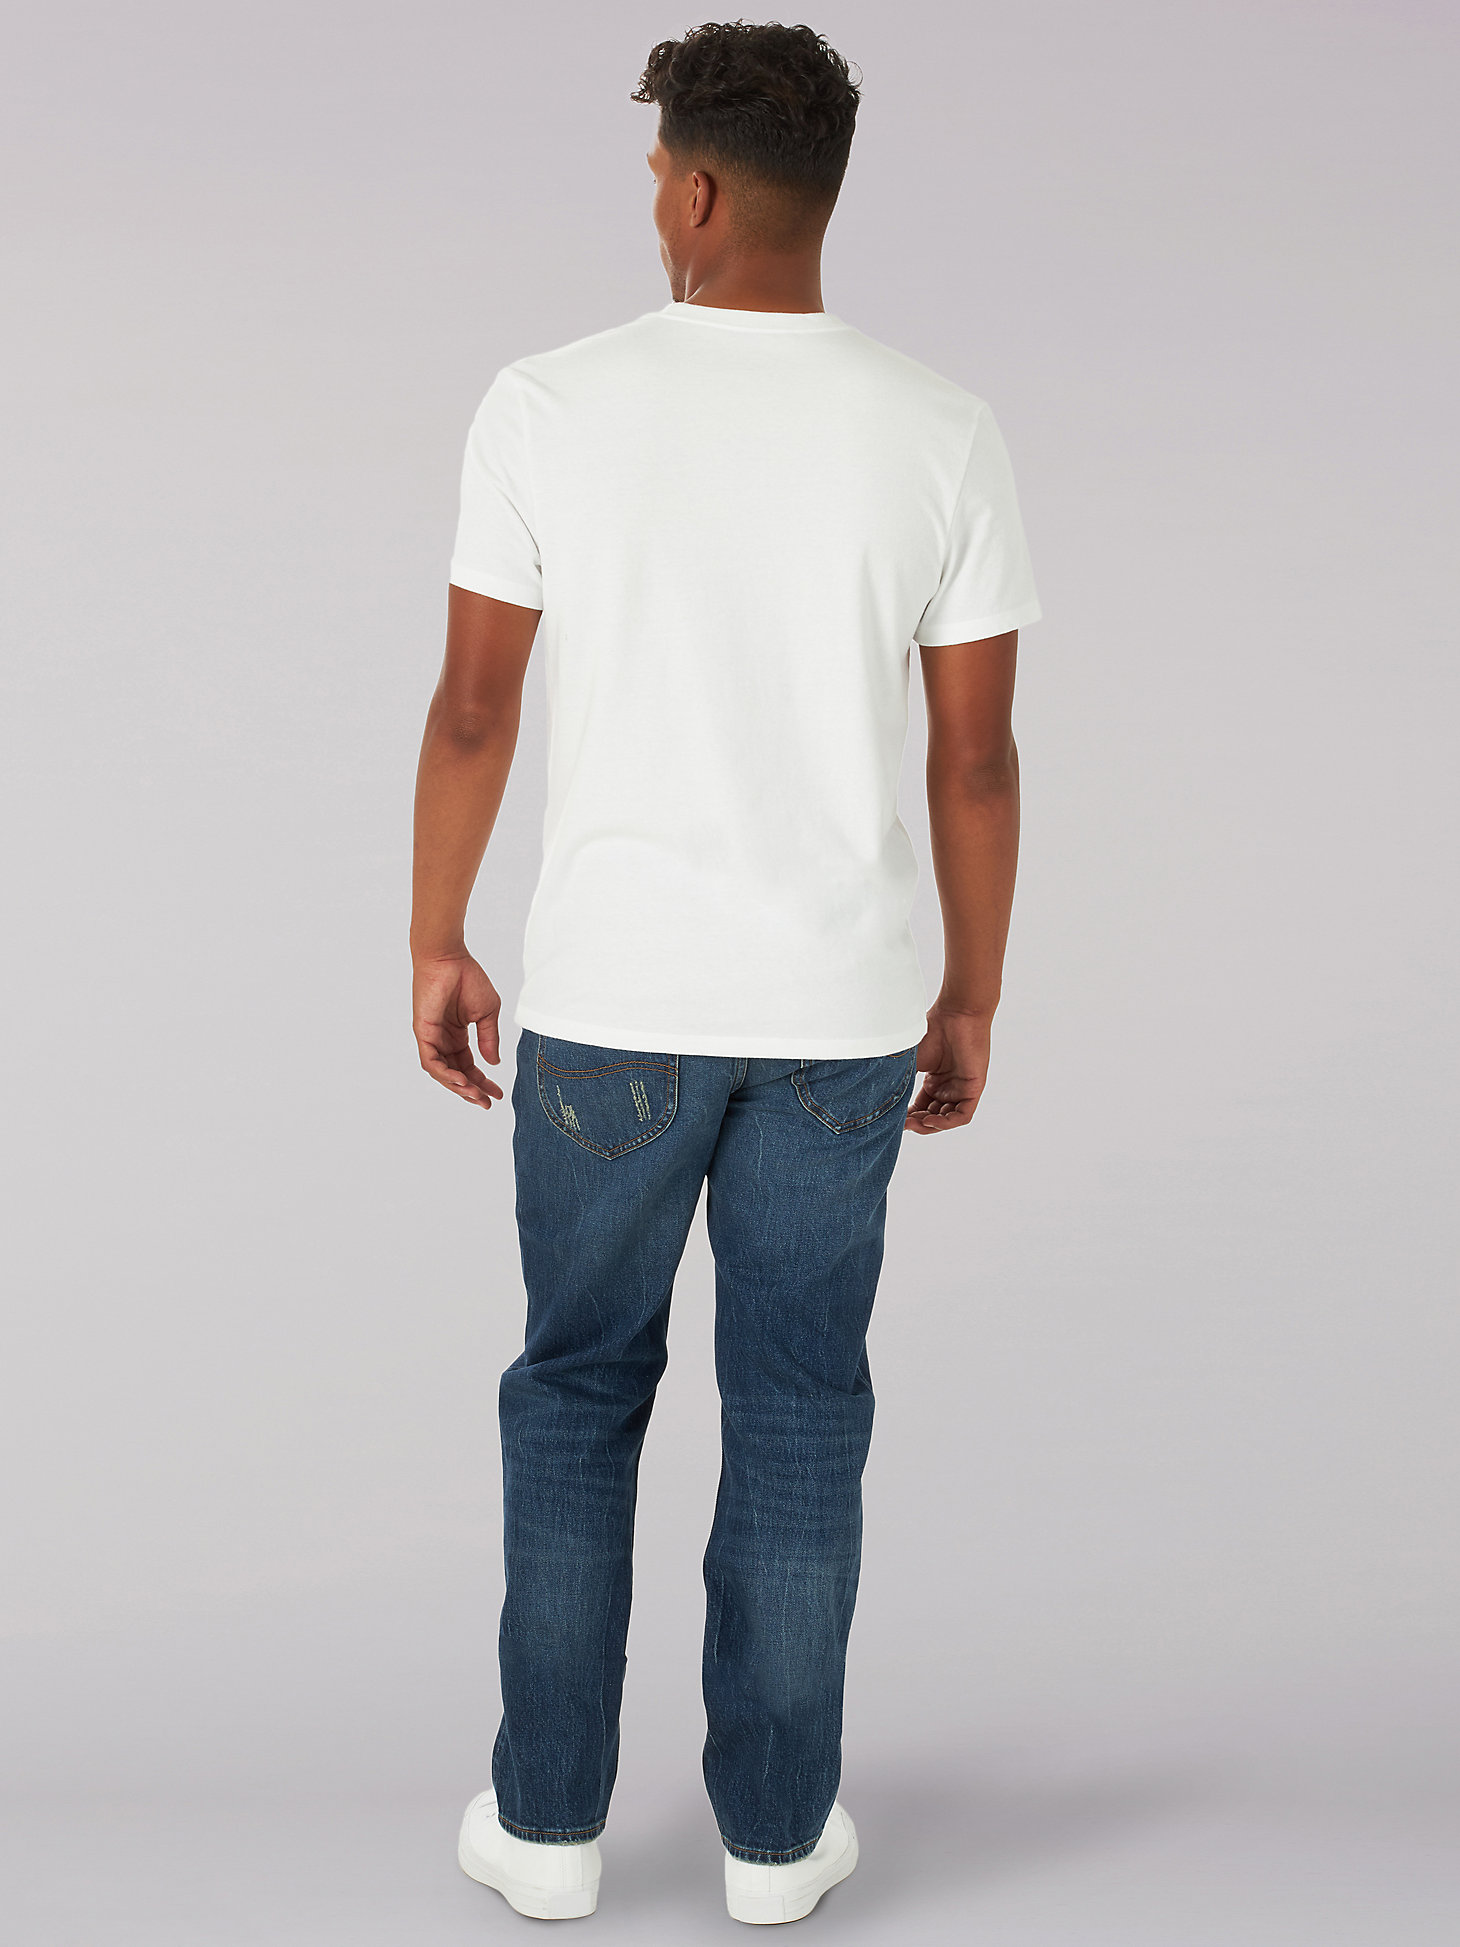 Men's Heritage Storm Rider Graphic Tee in Solid White alternative view 1